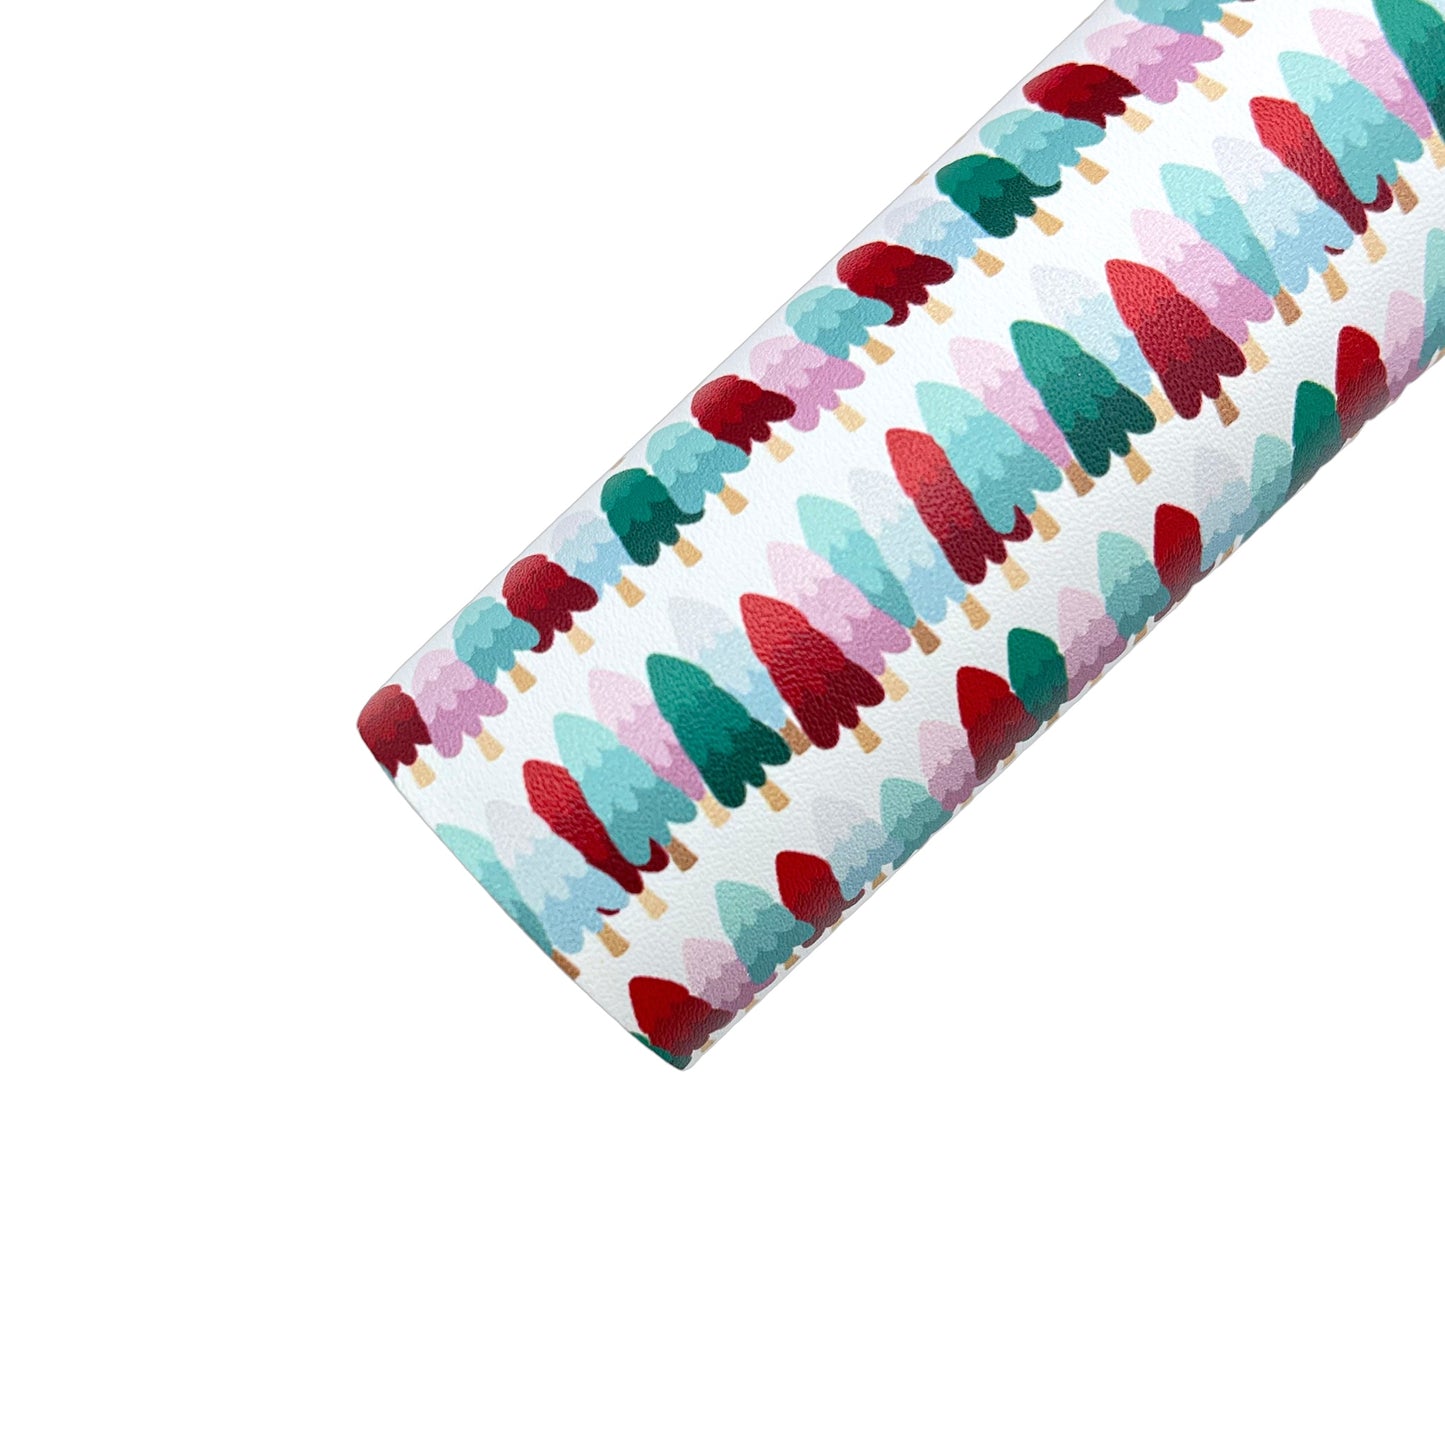 Rolled white faux leather sheet with red, green, and pink Christmas tree pattern.